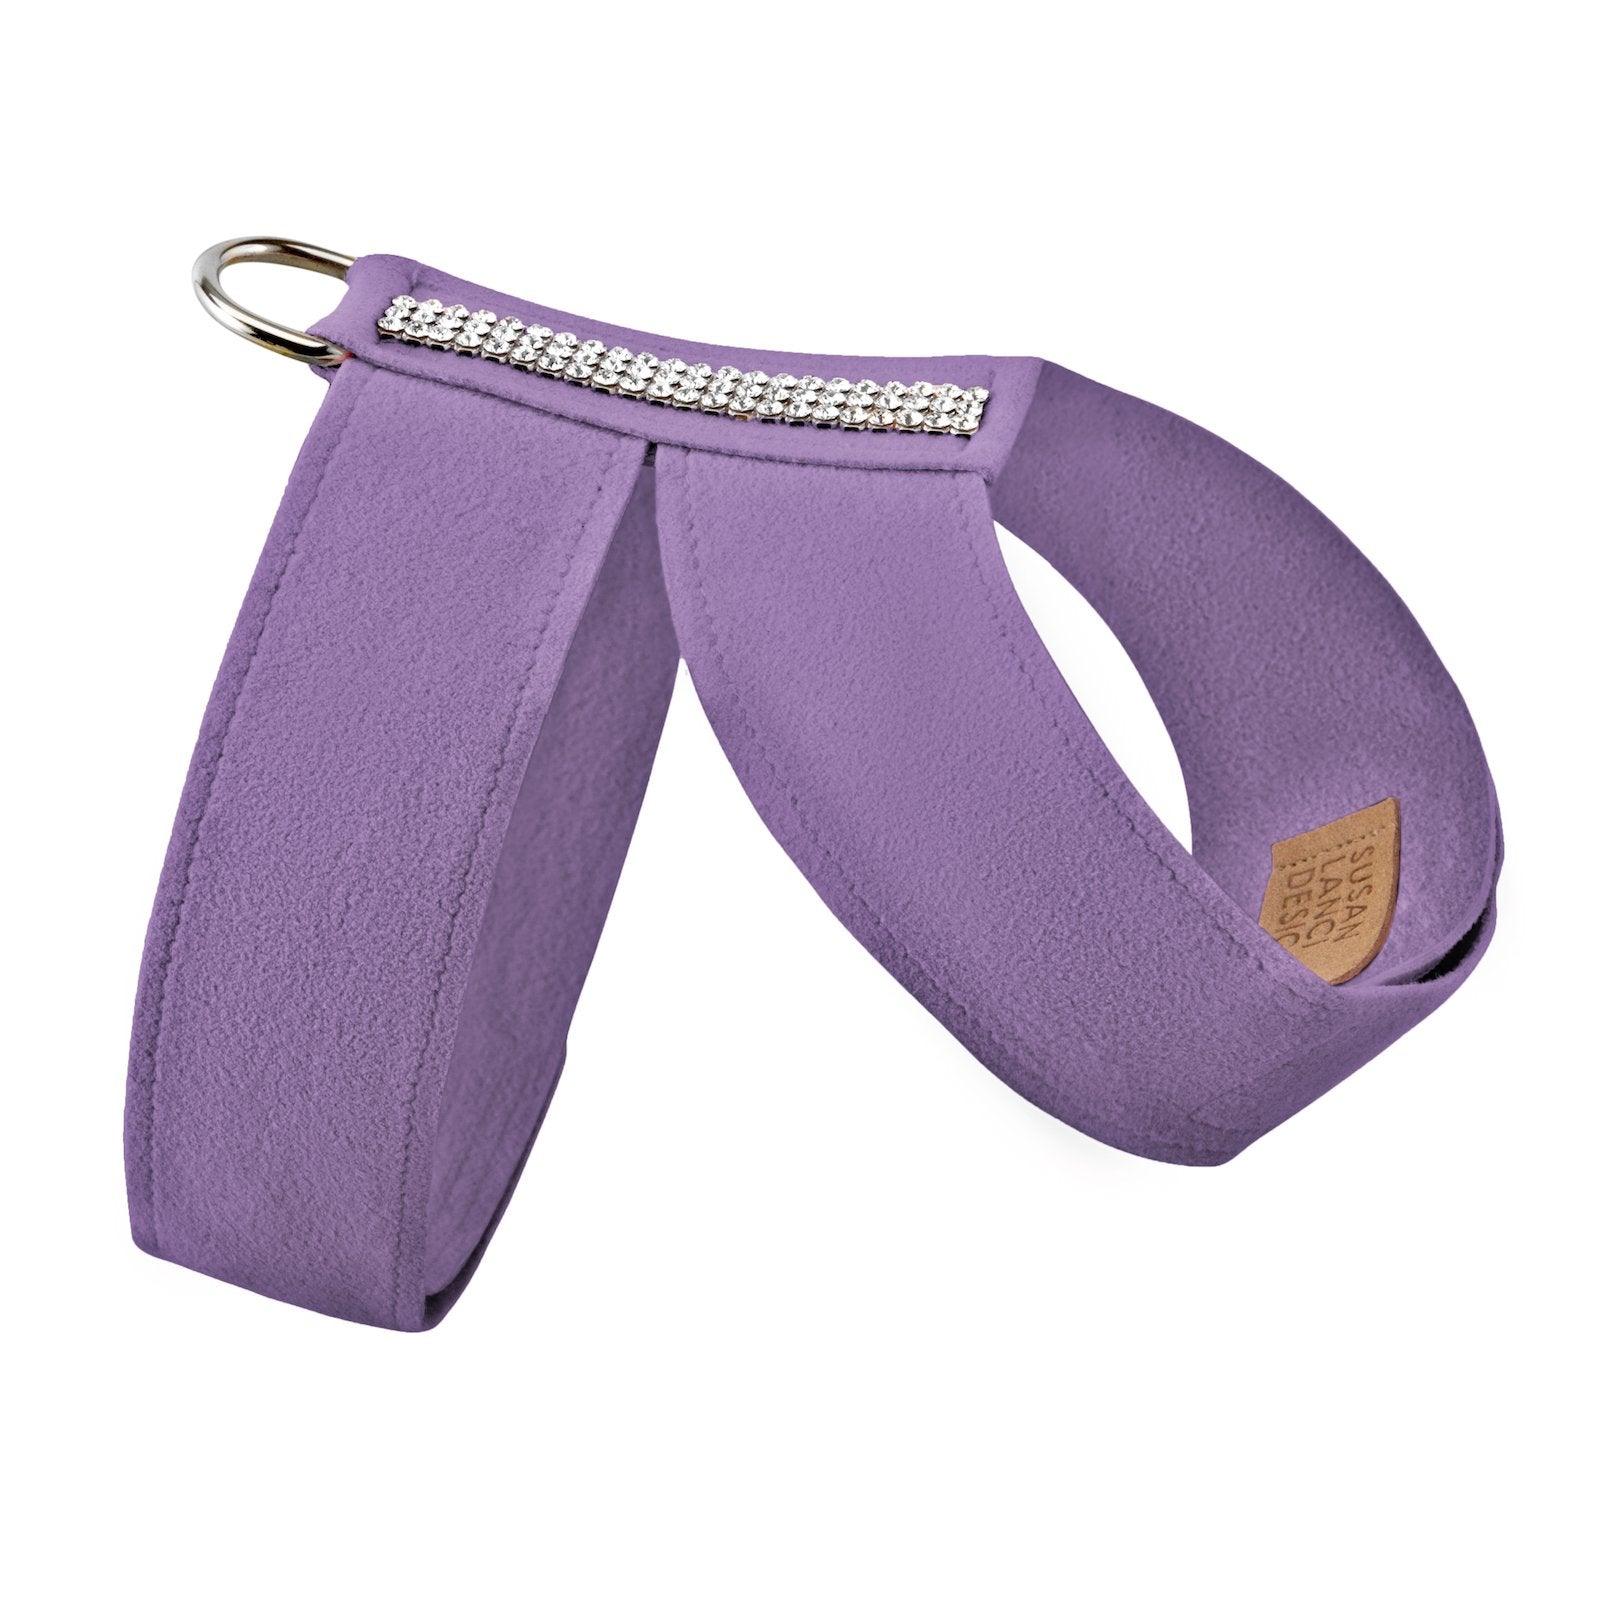 3 Row Giltmore Tinkie Harness - Rocky & Maggie's Pet Boutique and Salon